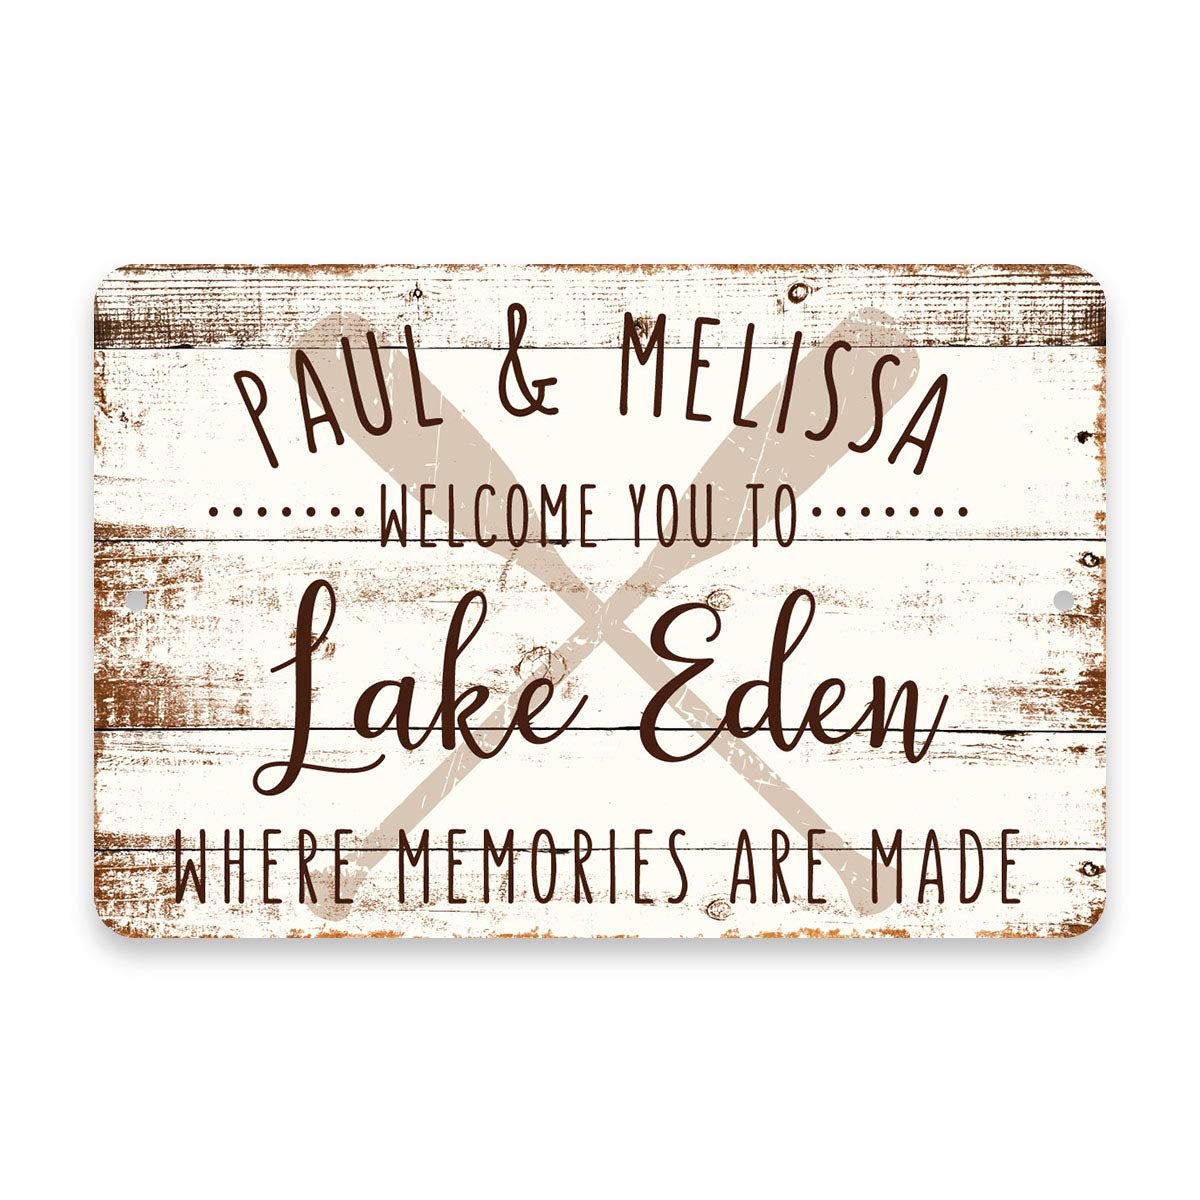 Personalized Welcome to Lake Eden Where Memories are Made Sign - 8 X 12 Metal Sign with Wood Look